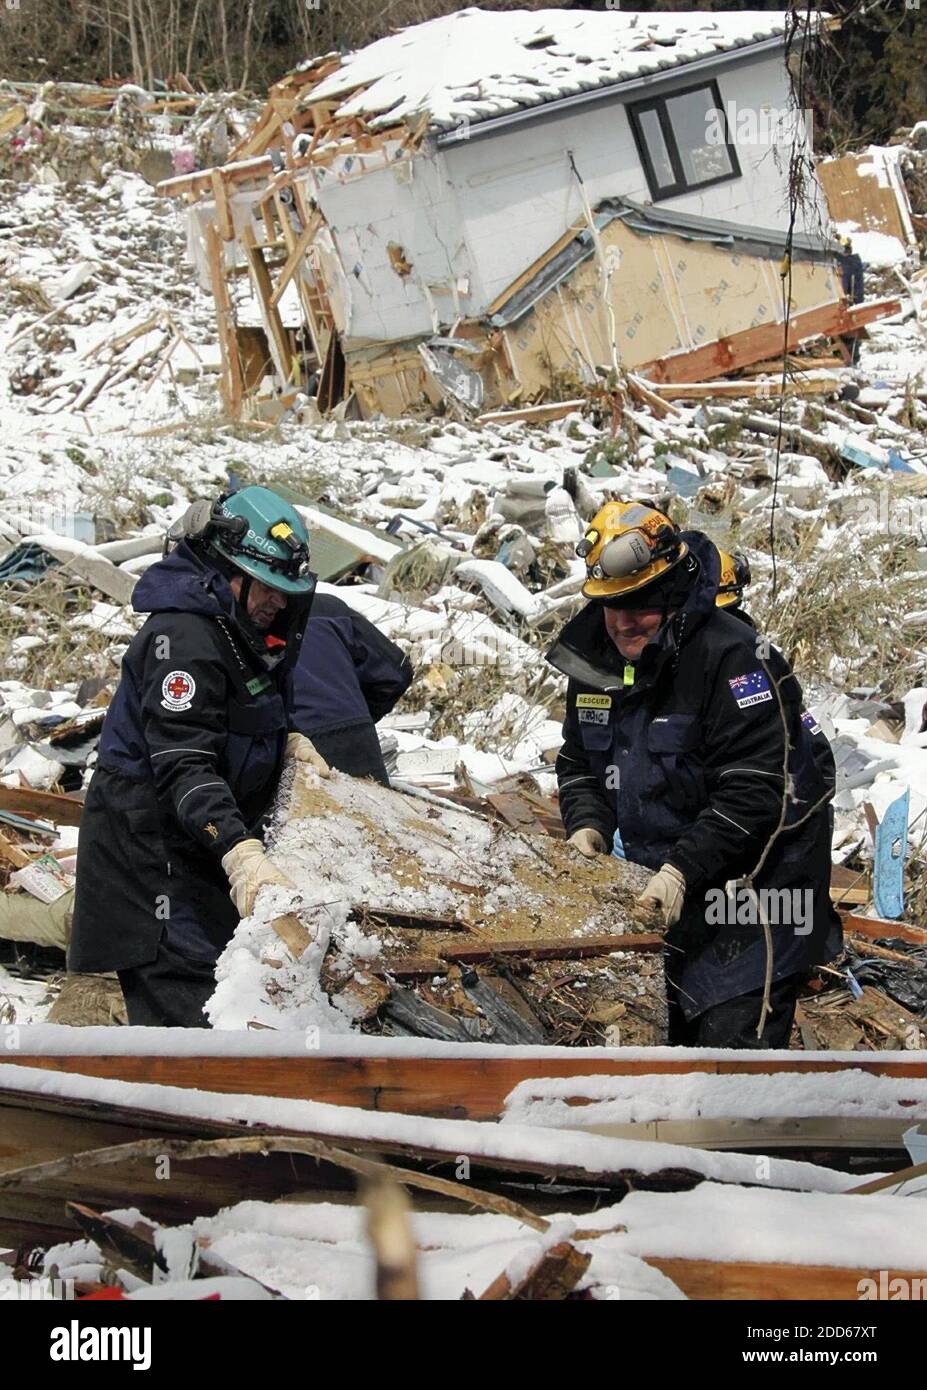 NO FILM, NO VIDEO, NO TV, NO DOCUMENTARY - Australian rescue workers search for missing people in Minami-Sanrikucho, Miyagi Prefecture, in Japan, on March 17, 2011. Photo by Yomiuri Shumbun/MCT/ABACAPRESS.COM Stock Photo